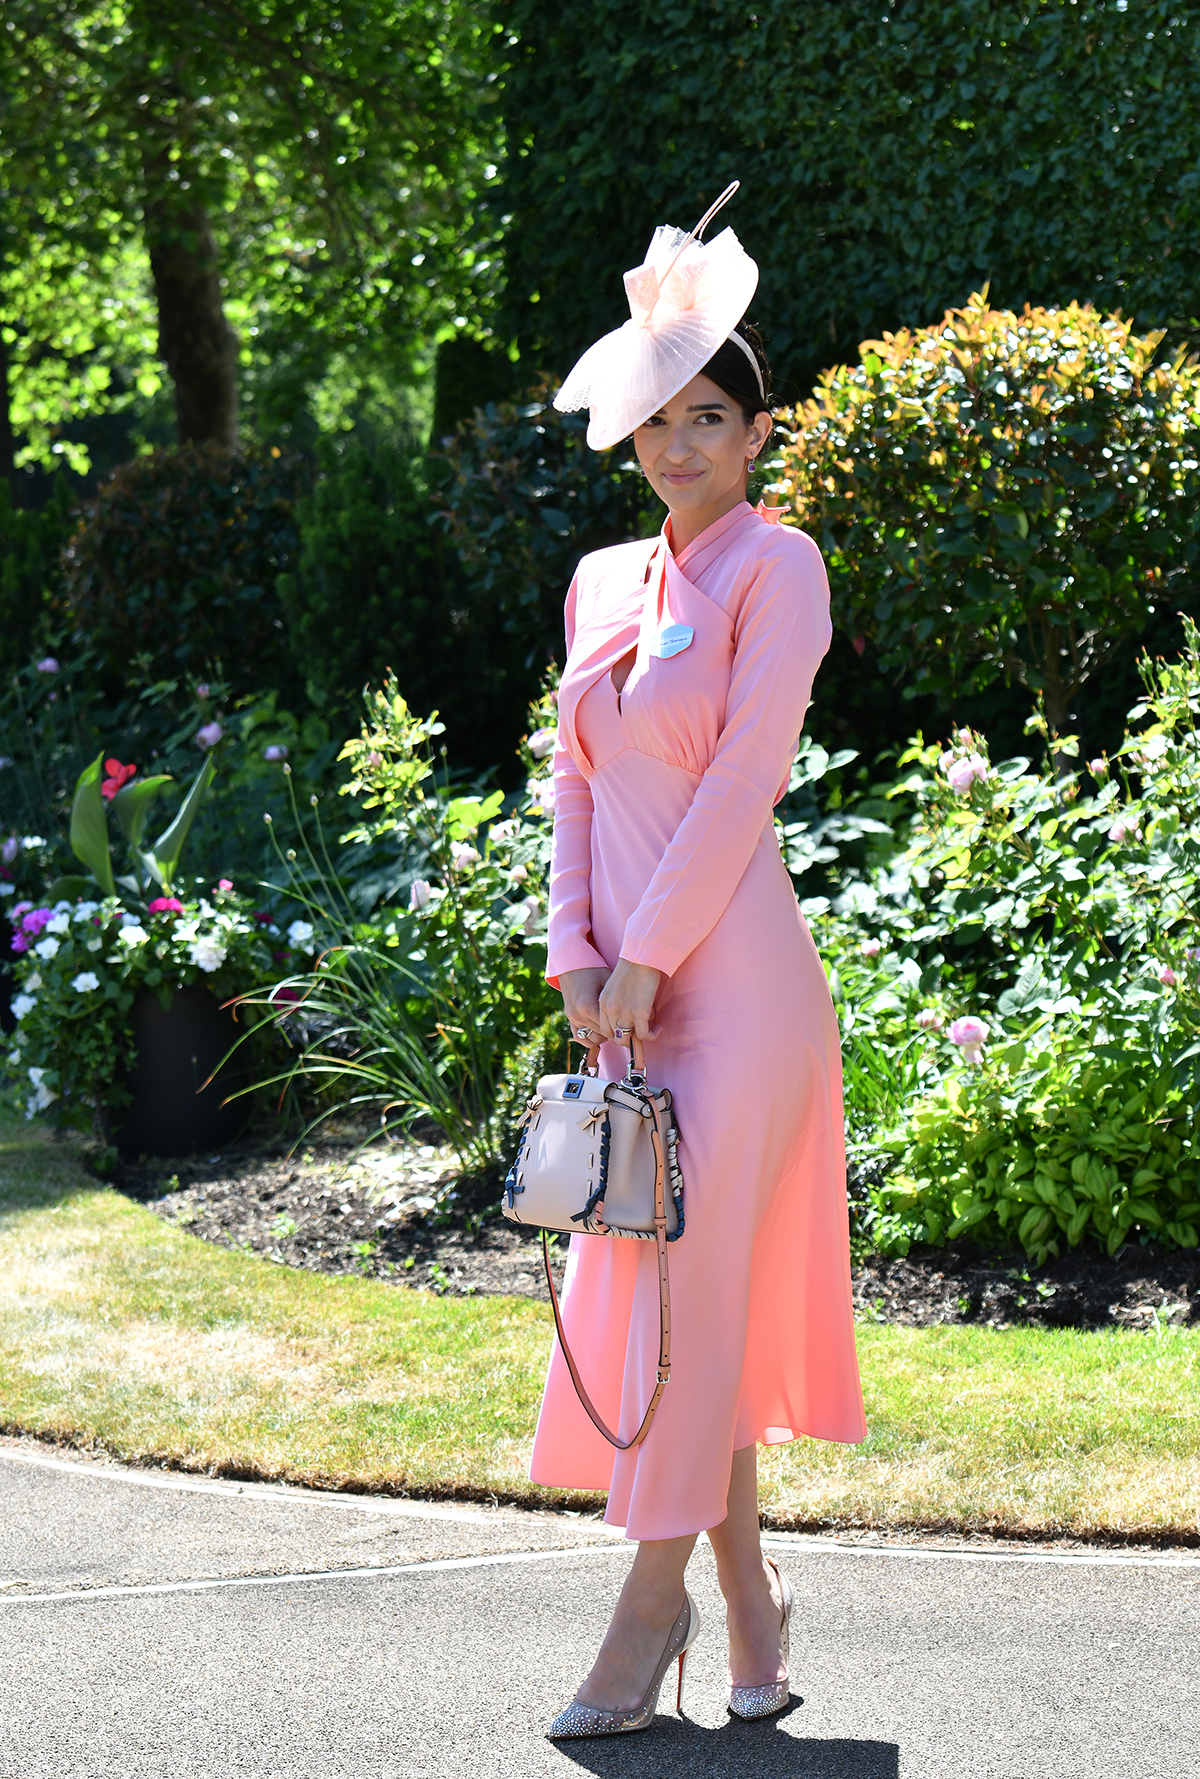 These Ultra-Fabulous Ascot Outfits Are Exactly What I Needed